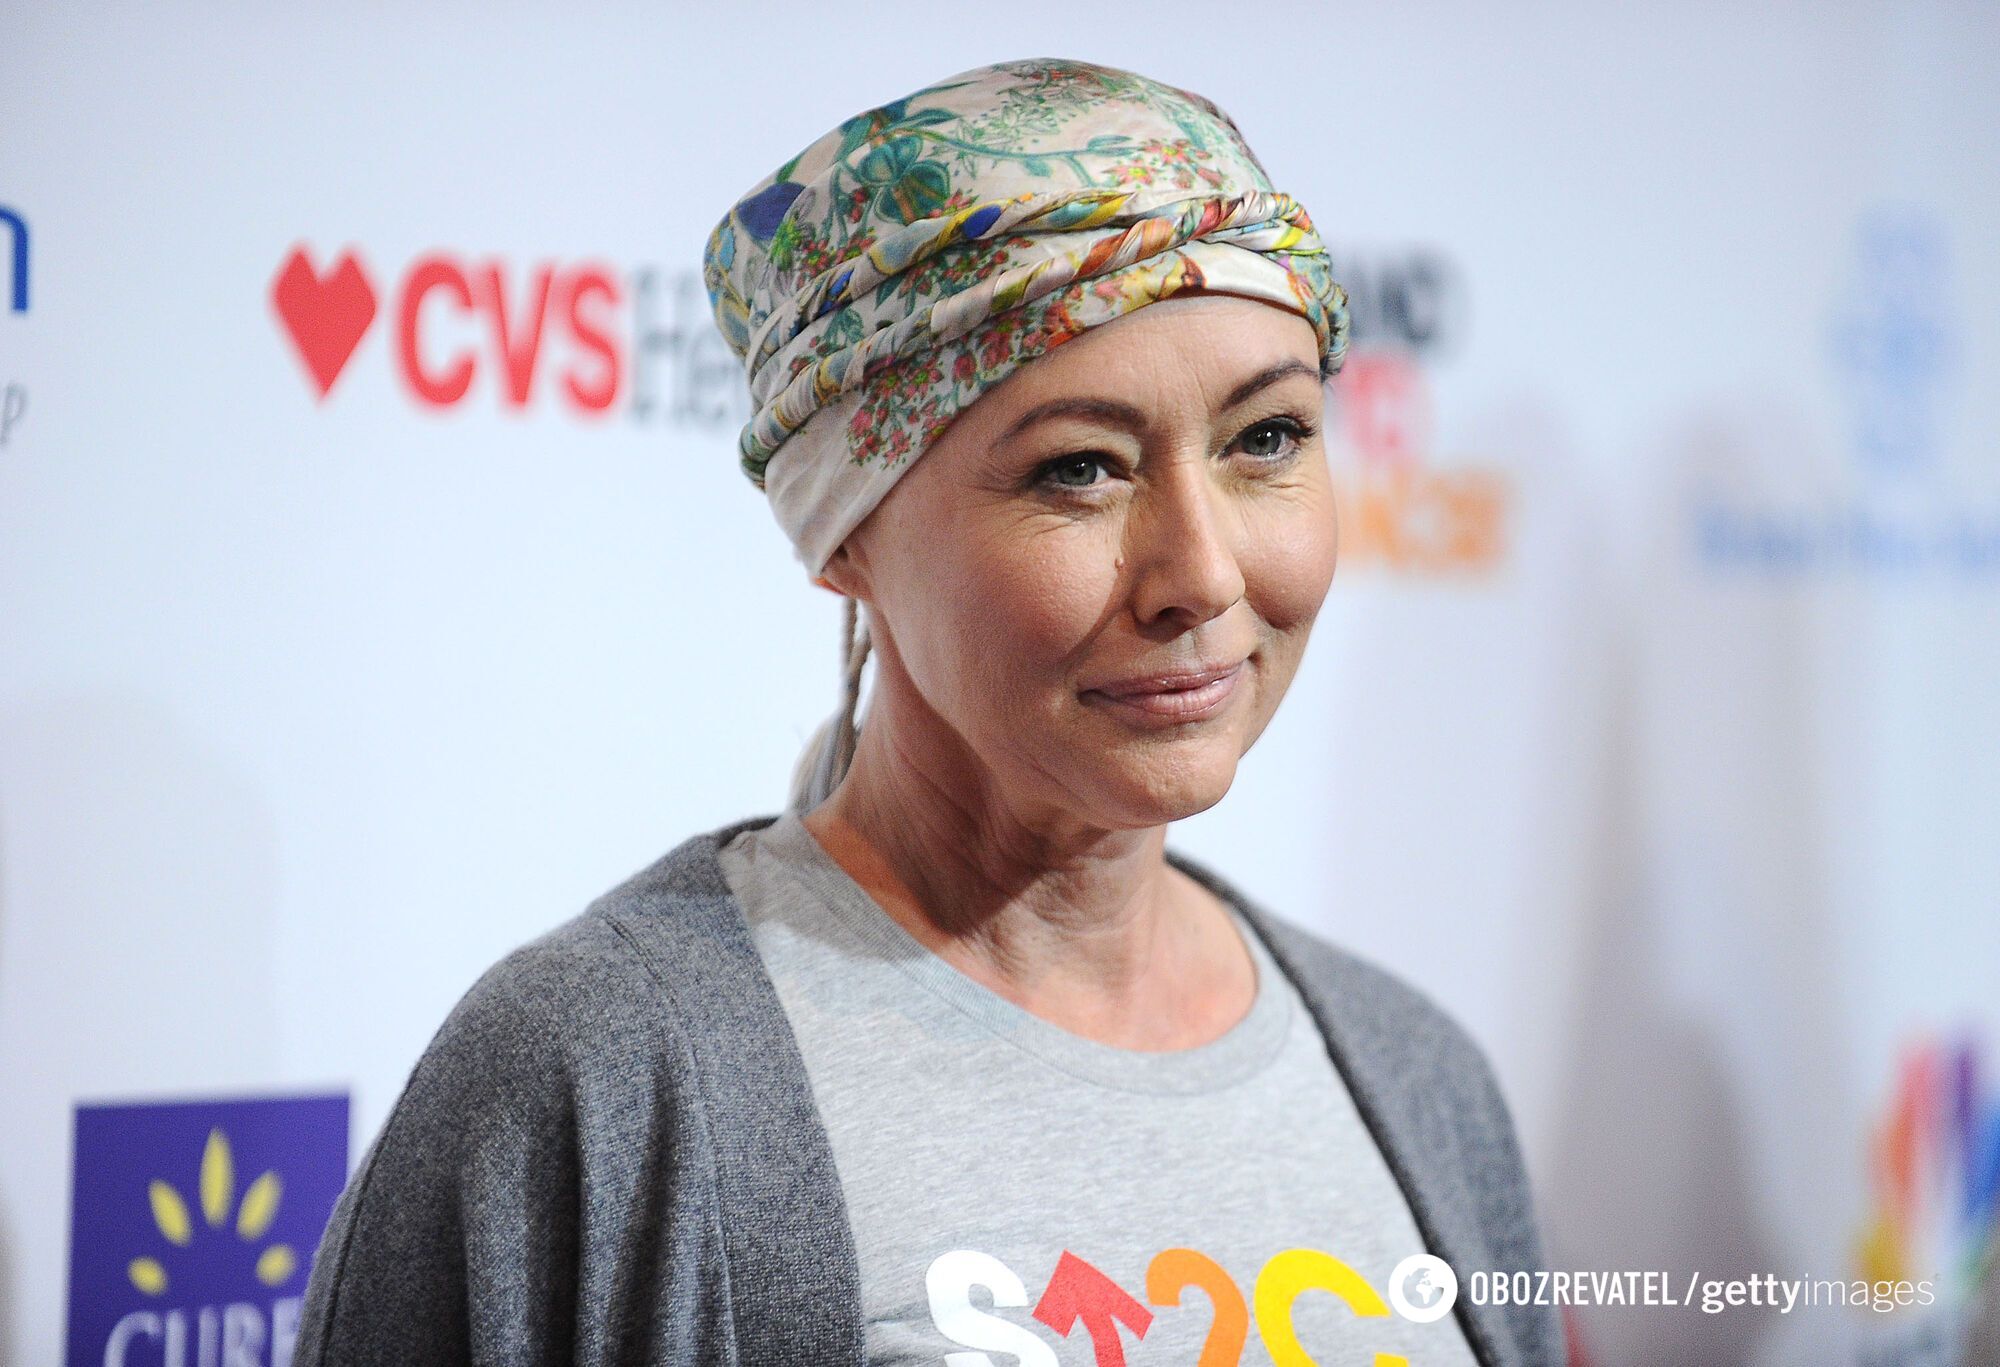 Cancer patient Shannen Doherty tells for the first time how her husband betrayed her and left her before a serious brain surgery